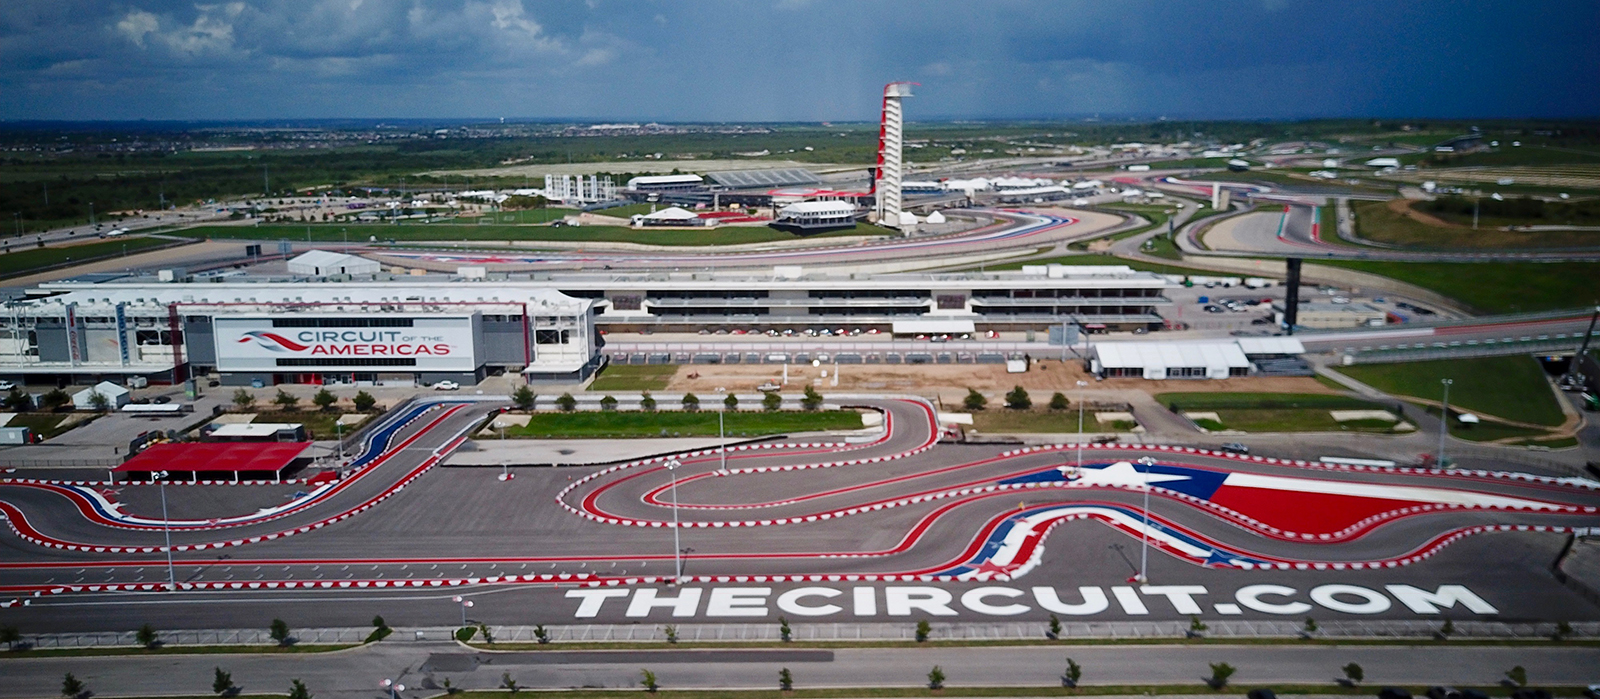 MotoGP: Sprint Race Results From COTA, With Photos (Updated) – Roadracing World Magazine